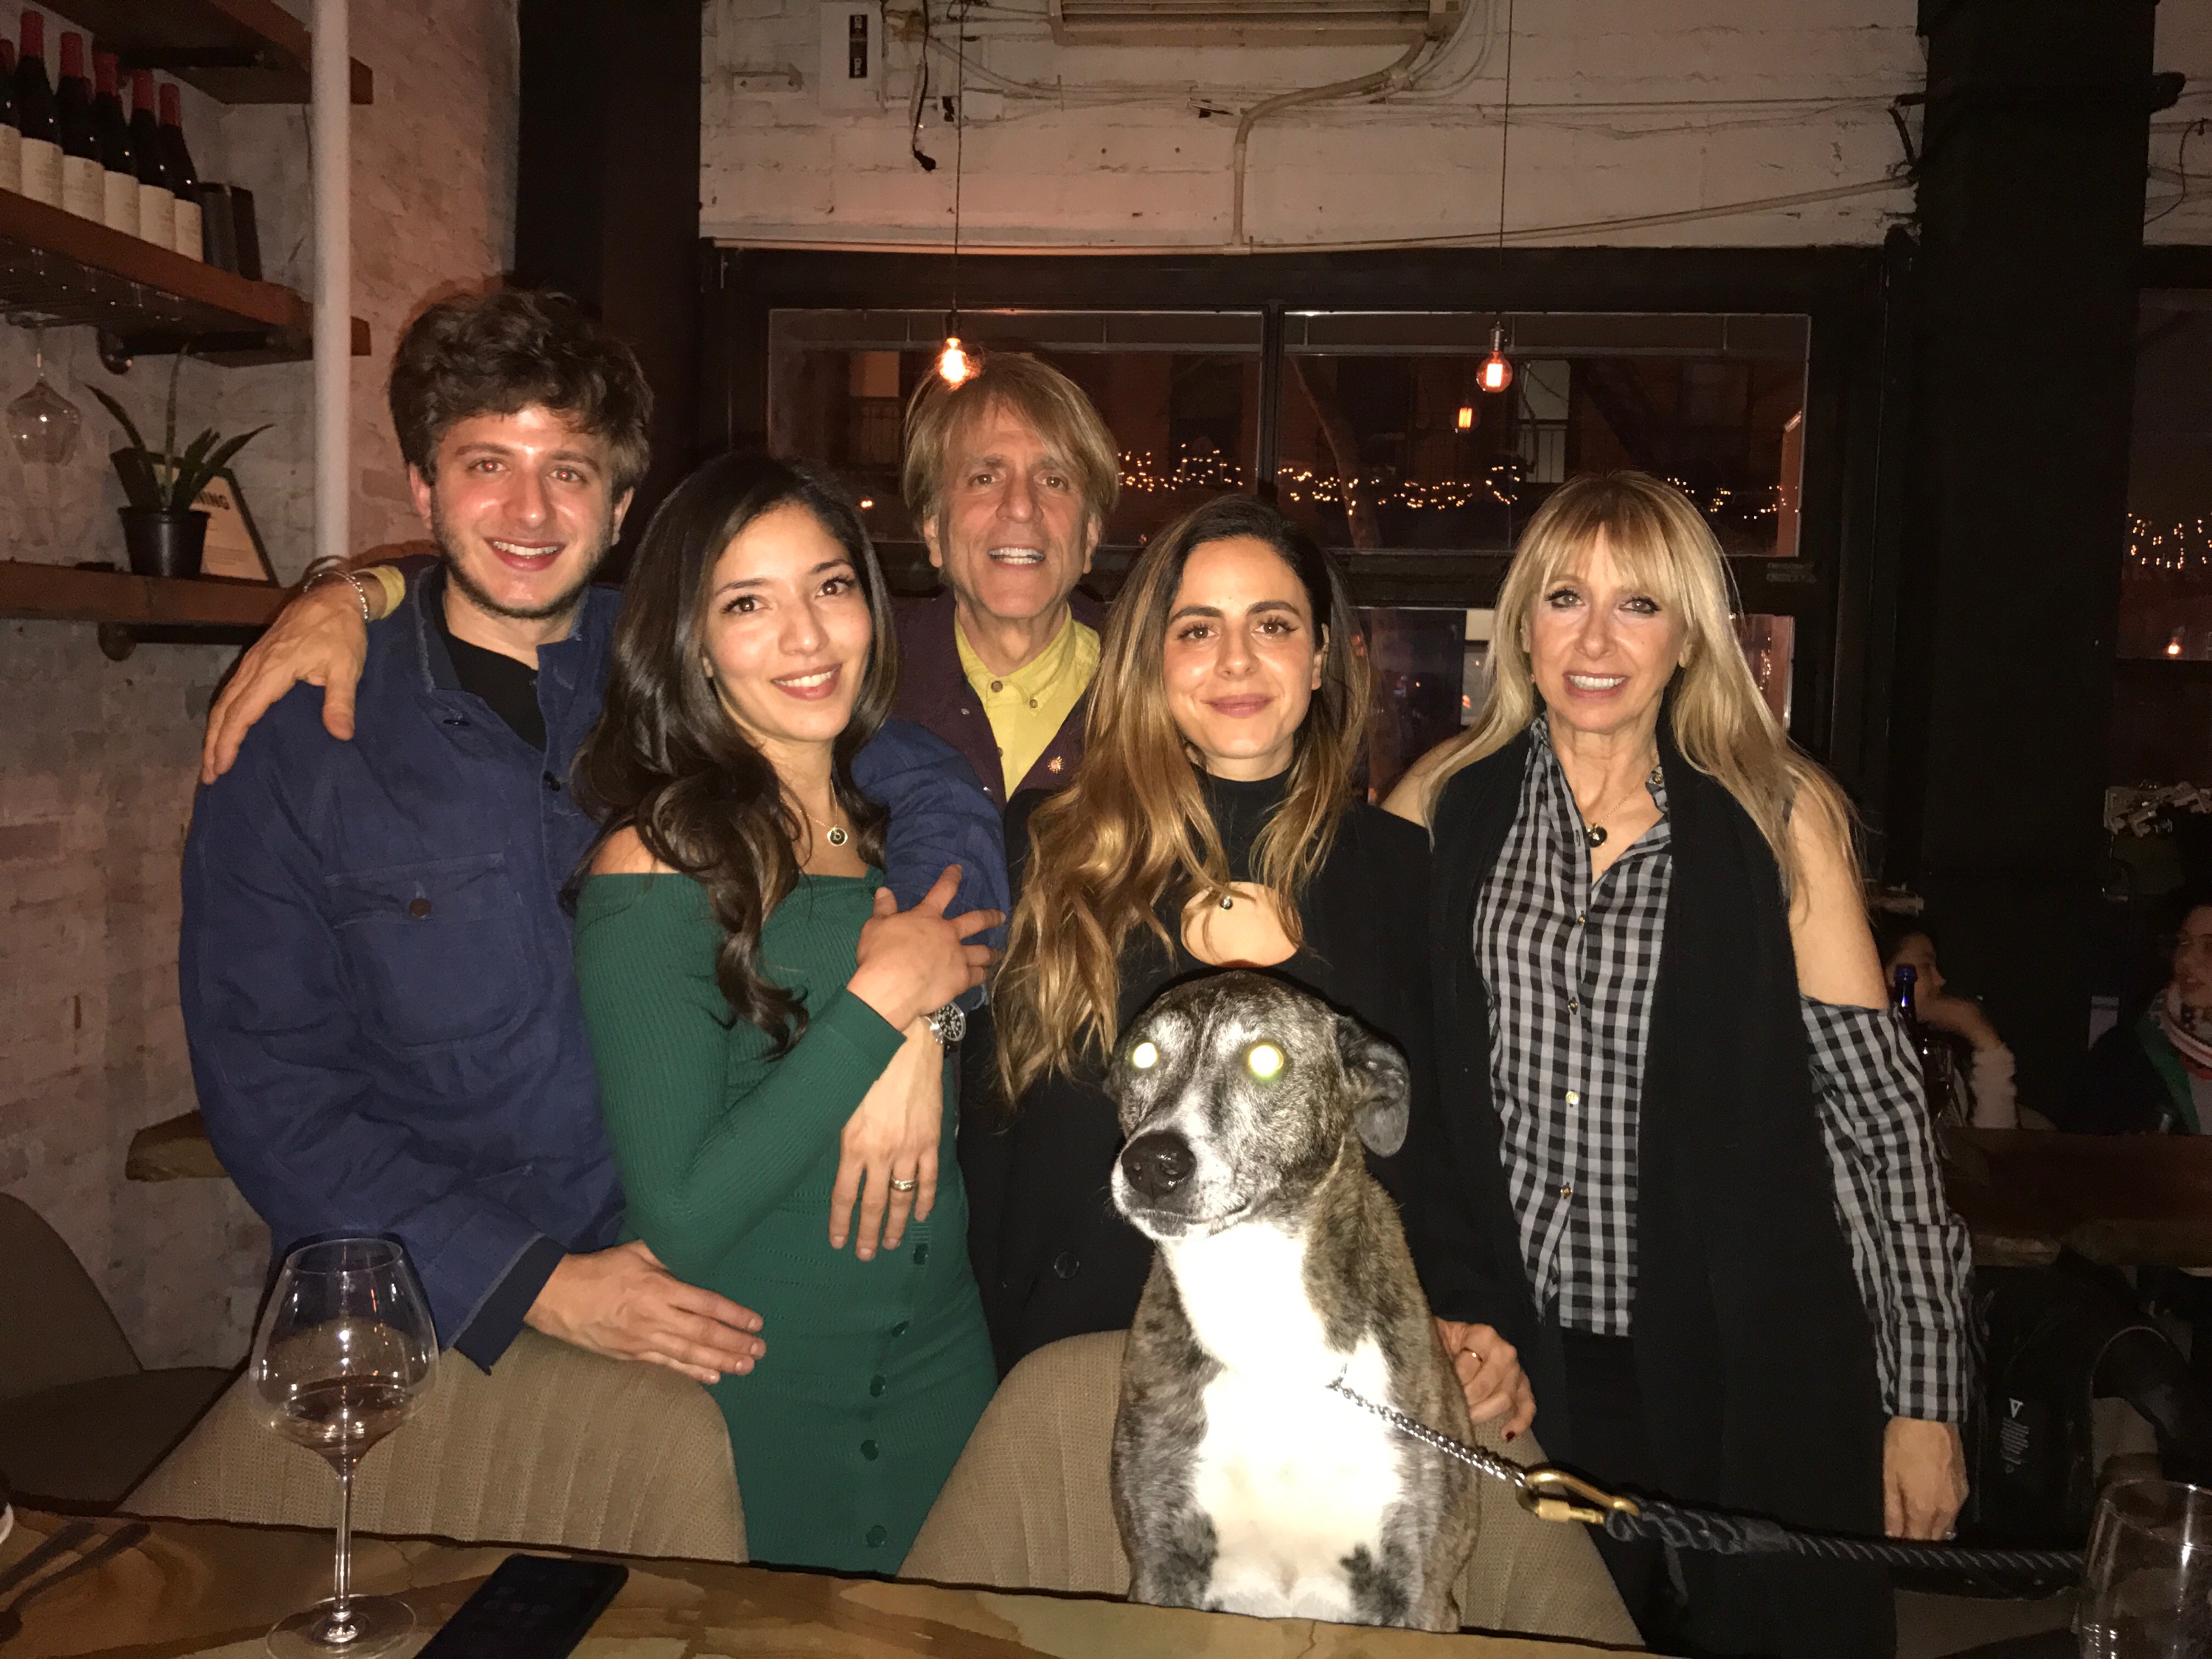 Irene Rizzo (far right) and her beautiful, happy family